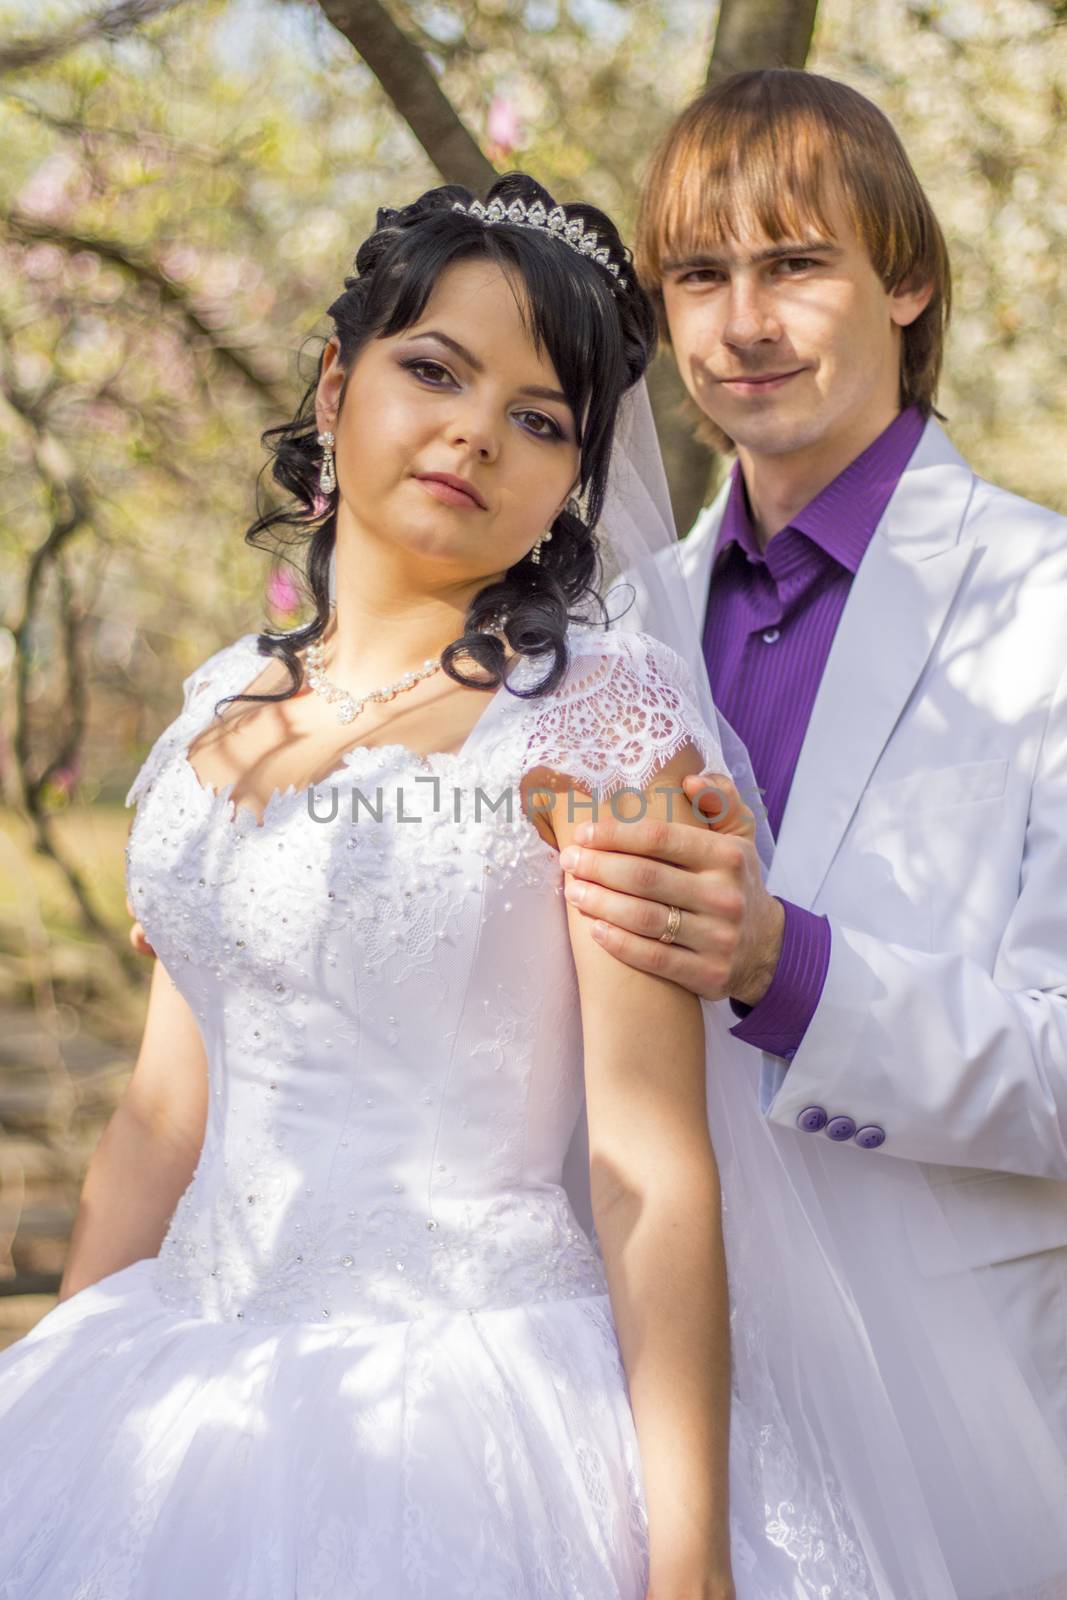 Happy young bride and groom on their wedding day. For your commercial and editorial use.